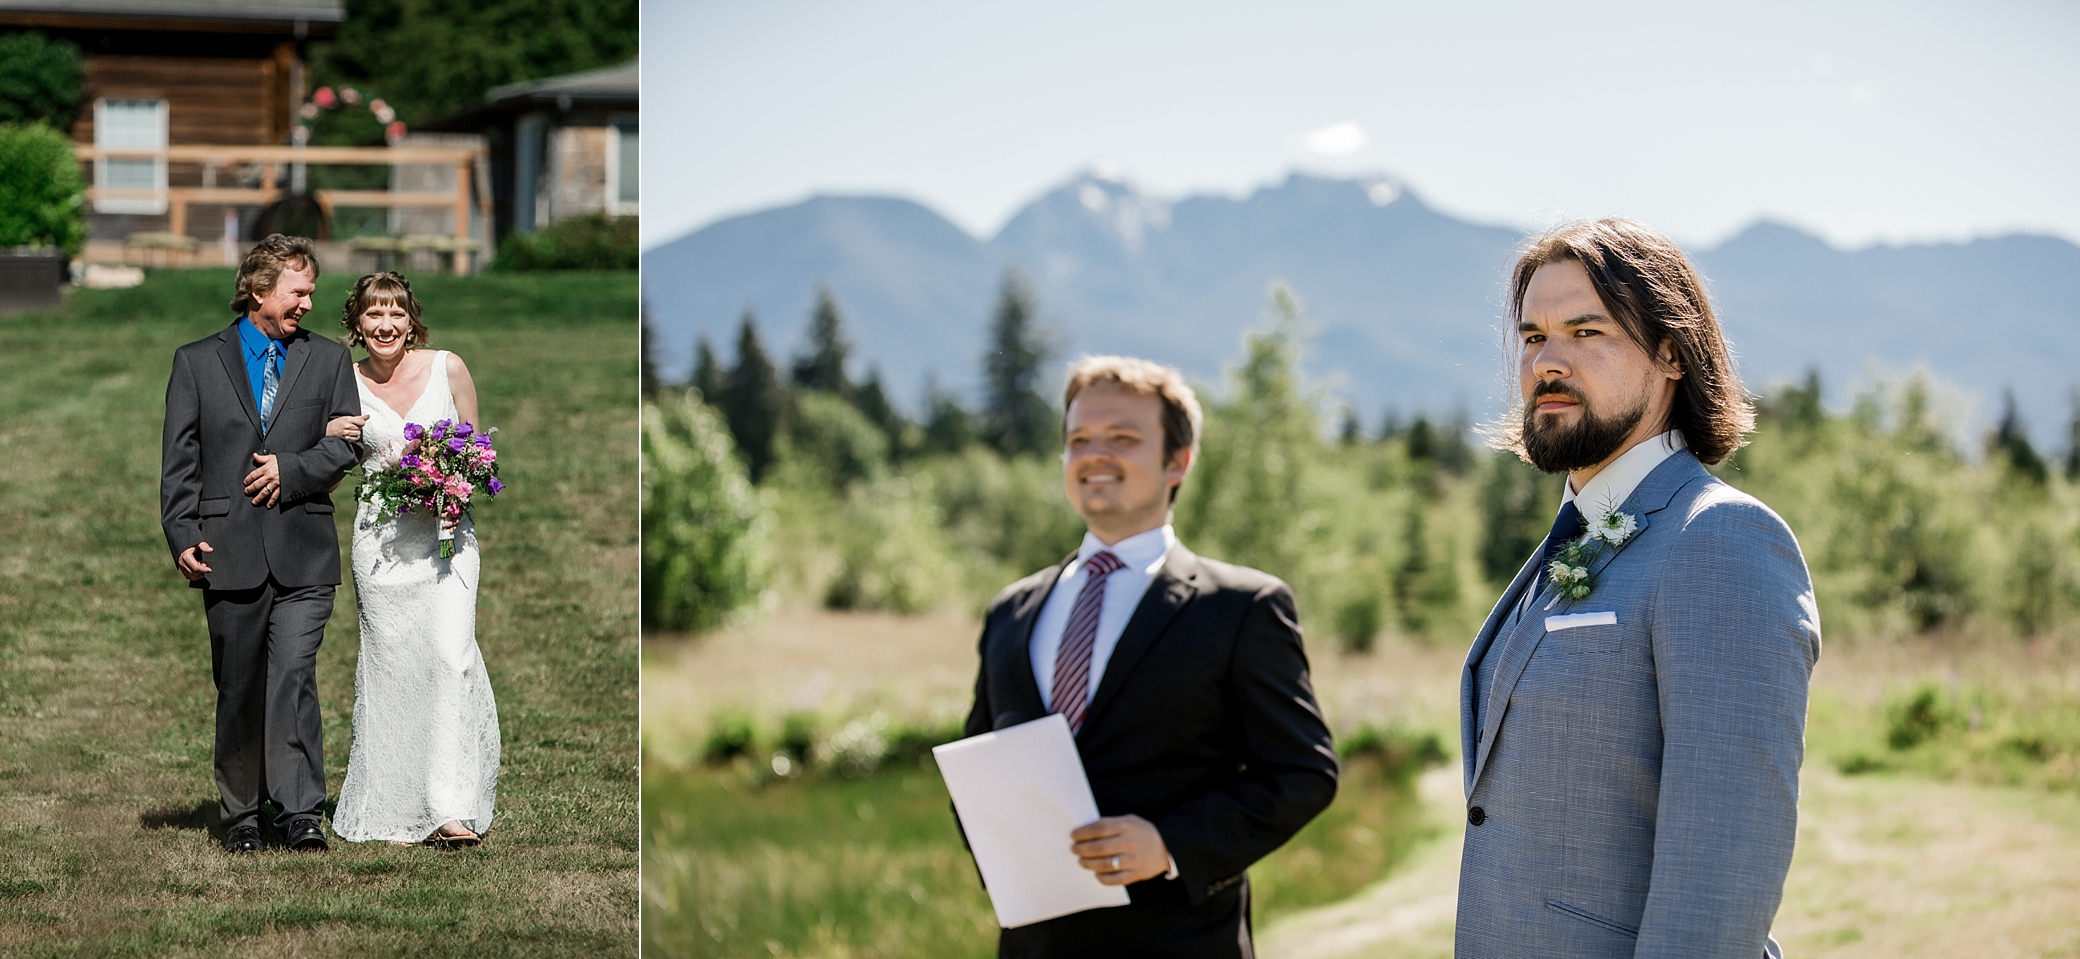 Bride walks down the aisle to groom for intimate wedding ceremony at Olympic View Cabins in the Olympic National Park | Megan Montalvo Photography 